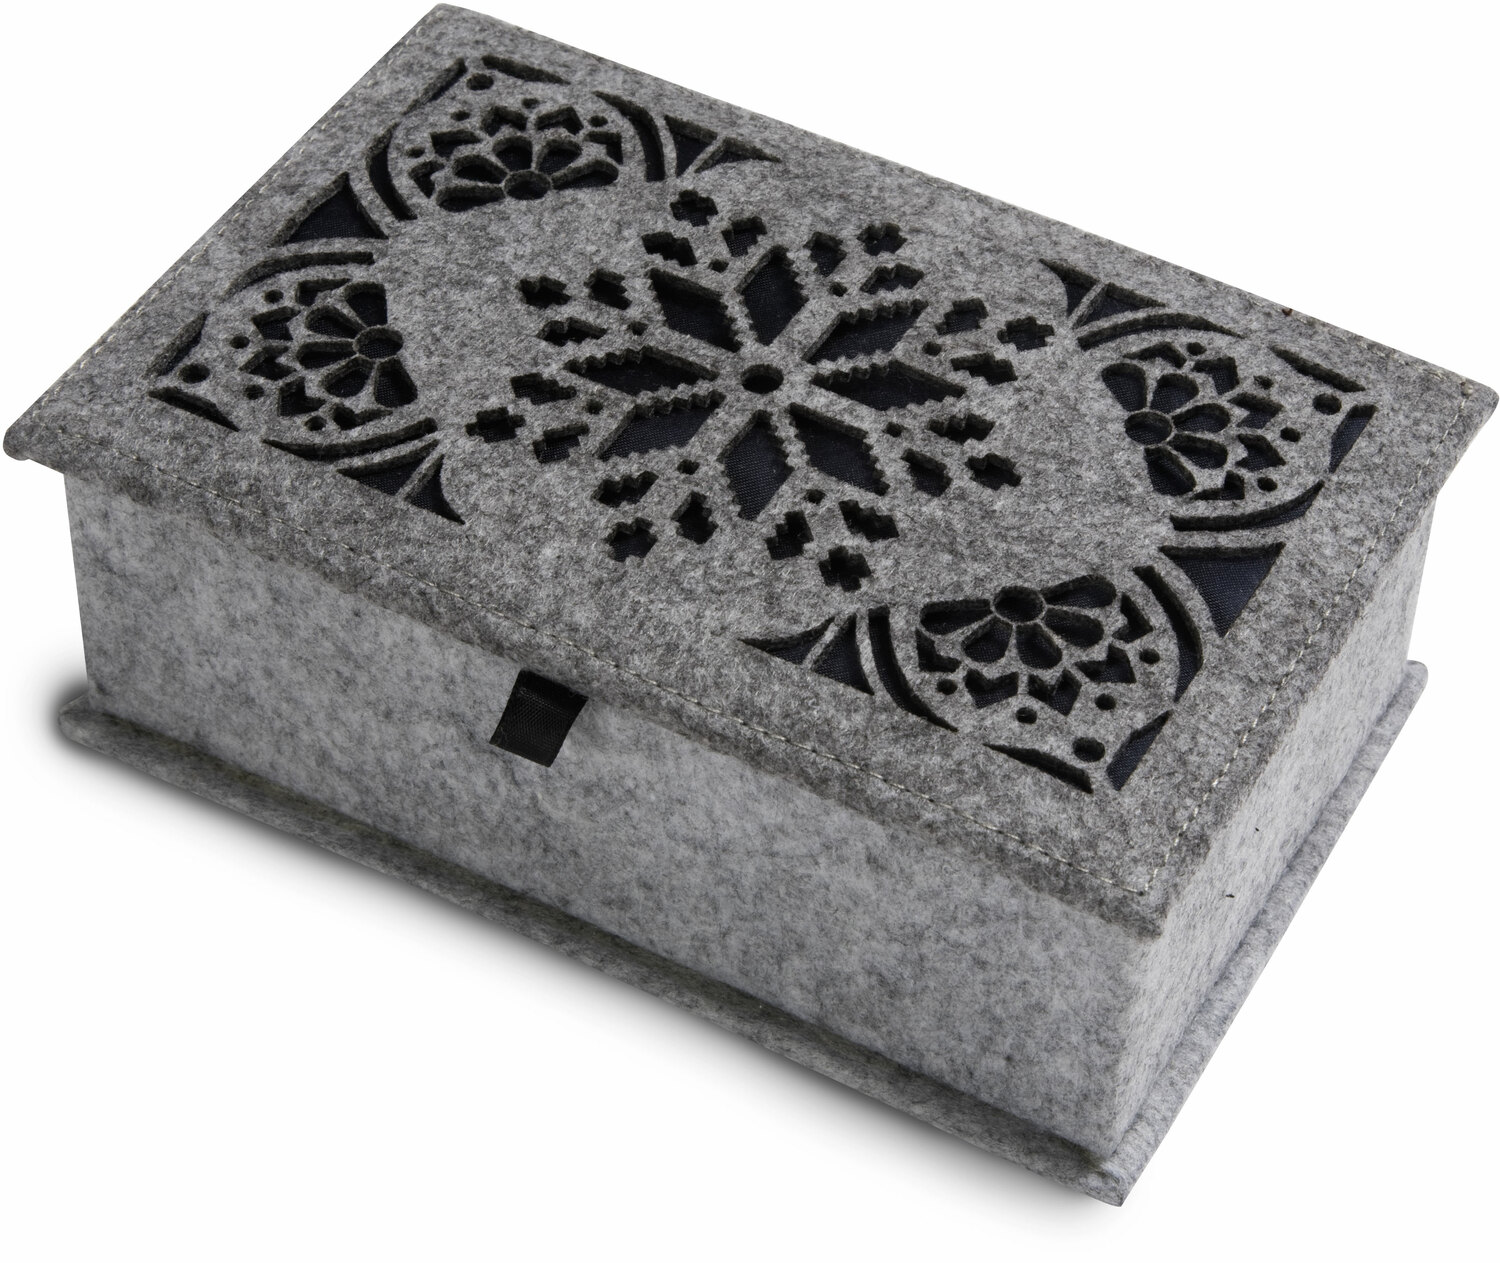 Heather Gray and Navy by H2Z Felt Accessories - Heather Gray and Navy - 7.75" x 5" x 2.75" Small Jewelry Box